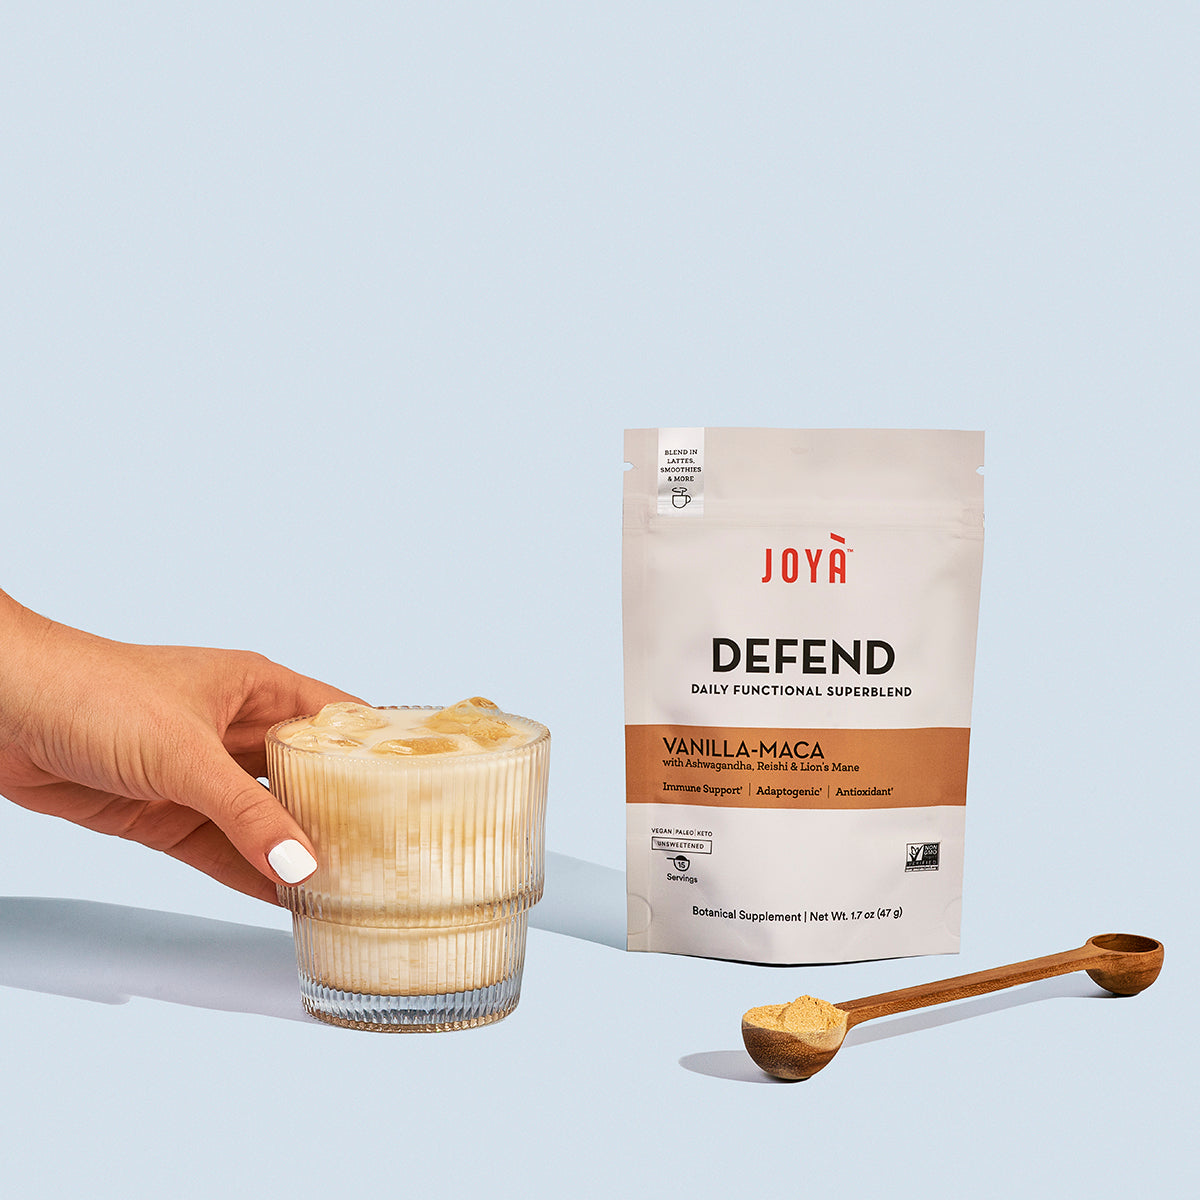 Defend Superblend 15-serving pouch sitting next to wooden spoon and a young woman's hand reaching for a glass of iced Defend vanilla-maca latte